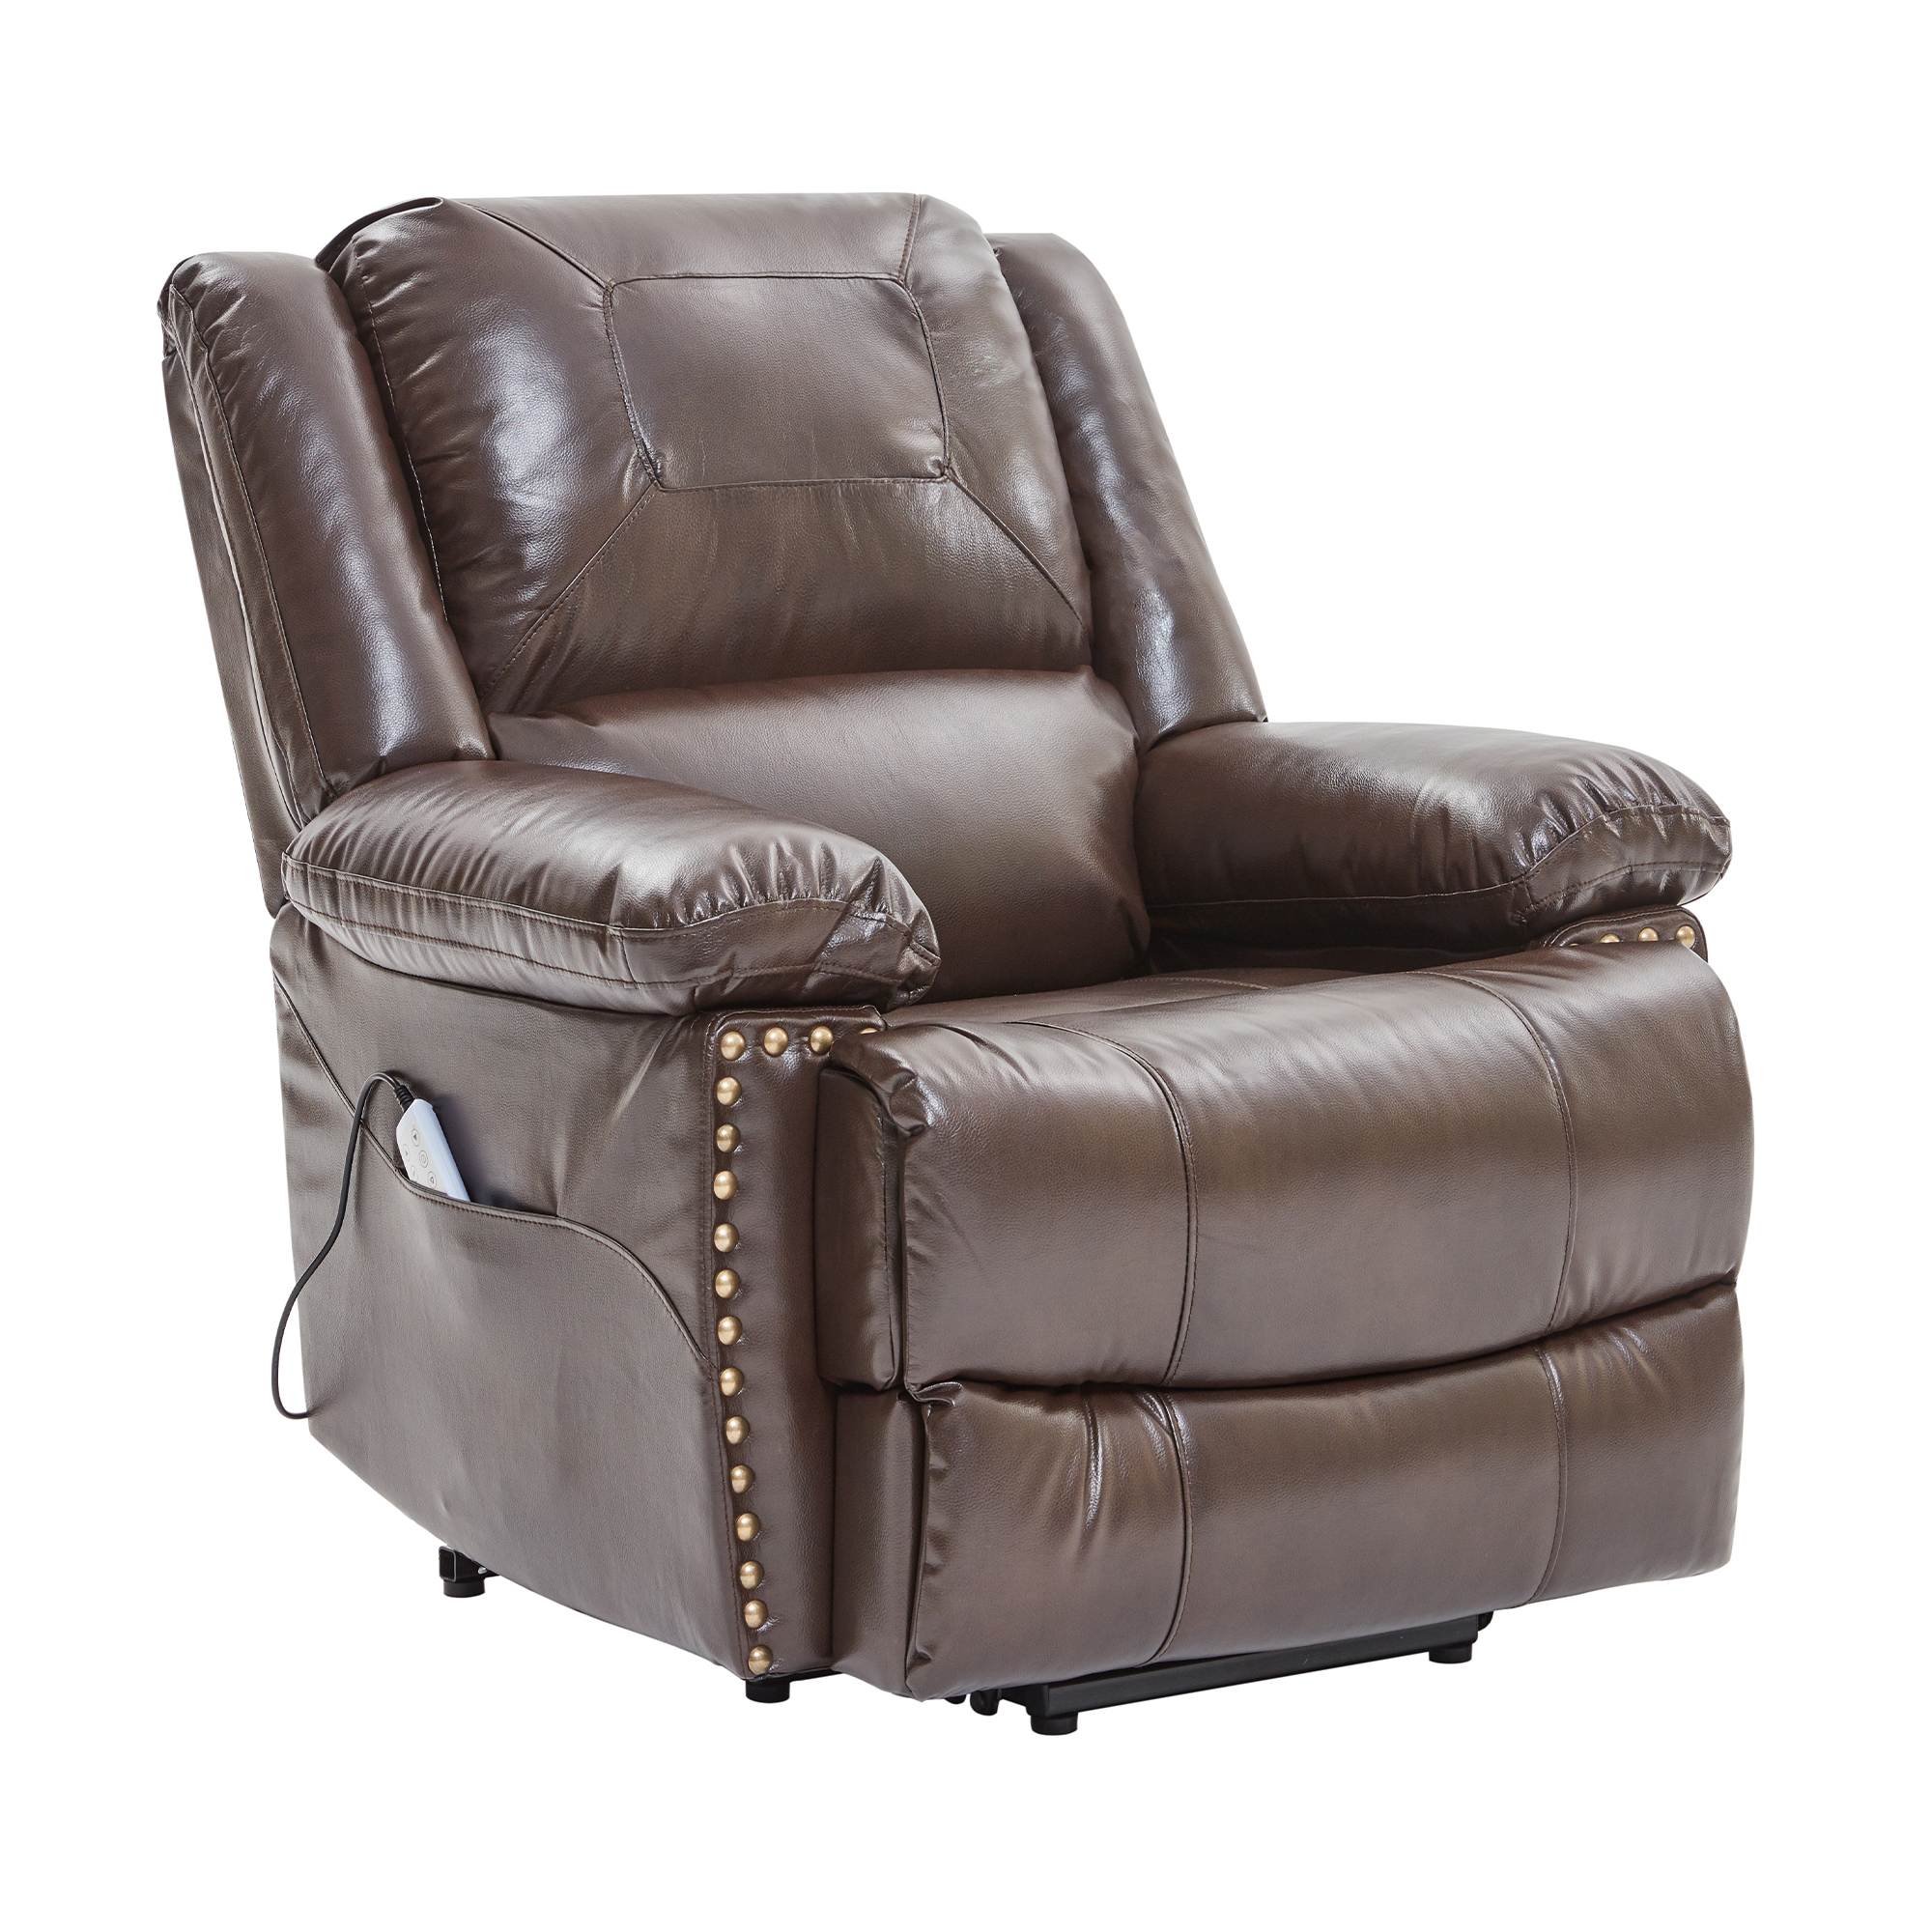 Sleep Recliner Chair With Massage and Heating System V2-Trysauna